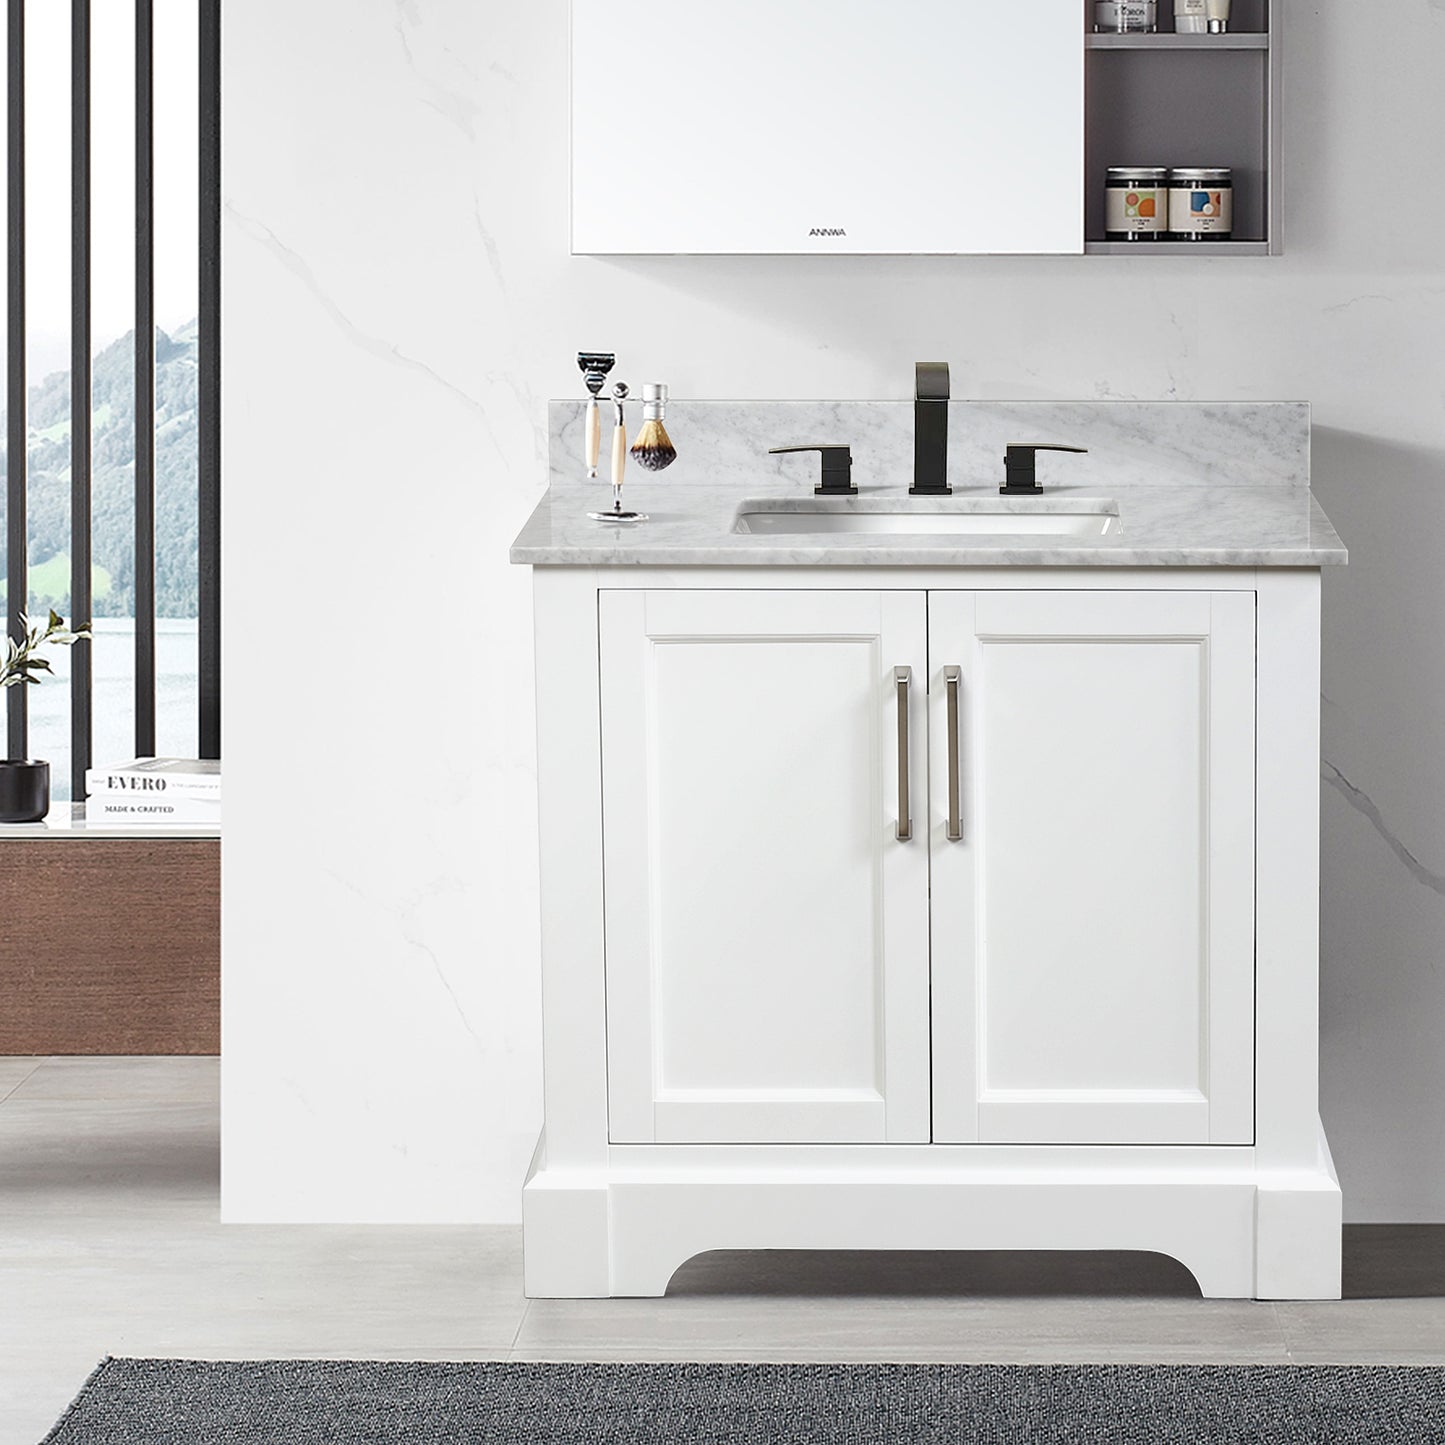 36 Inch Single Solid Wood Bathroom Vanity Set, with Drawers, Carrara White Marble Top, 3 Faucet Hole